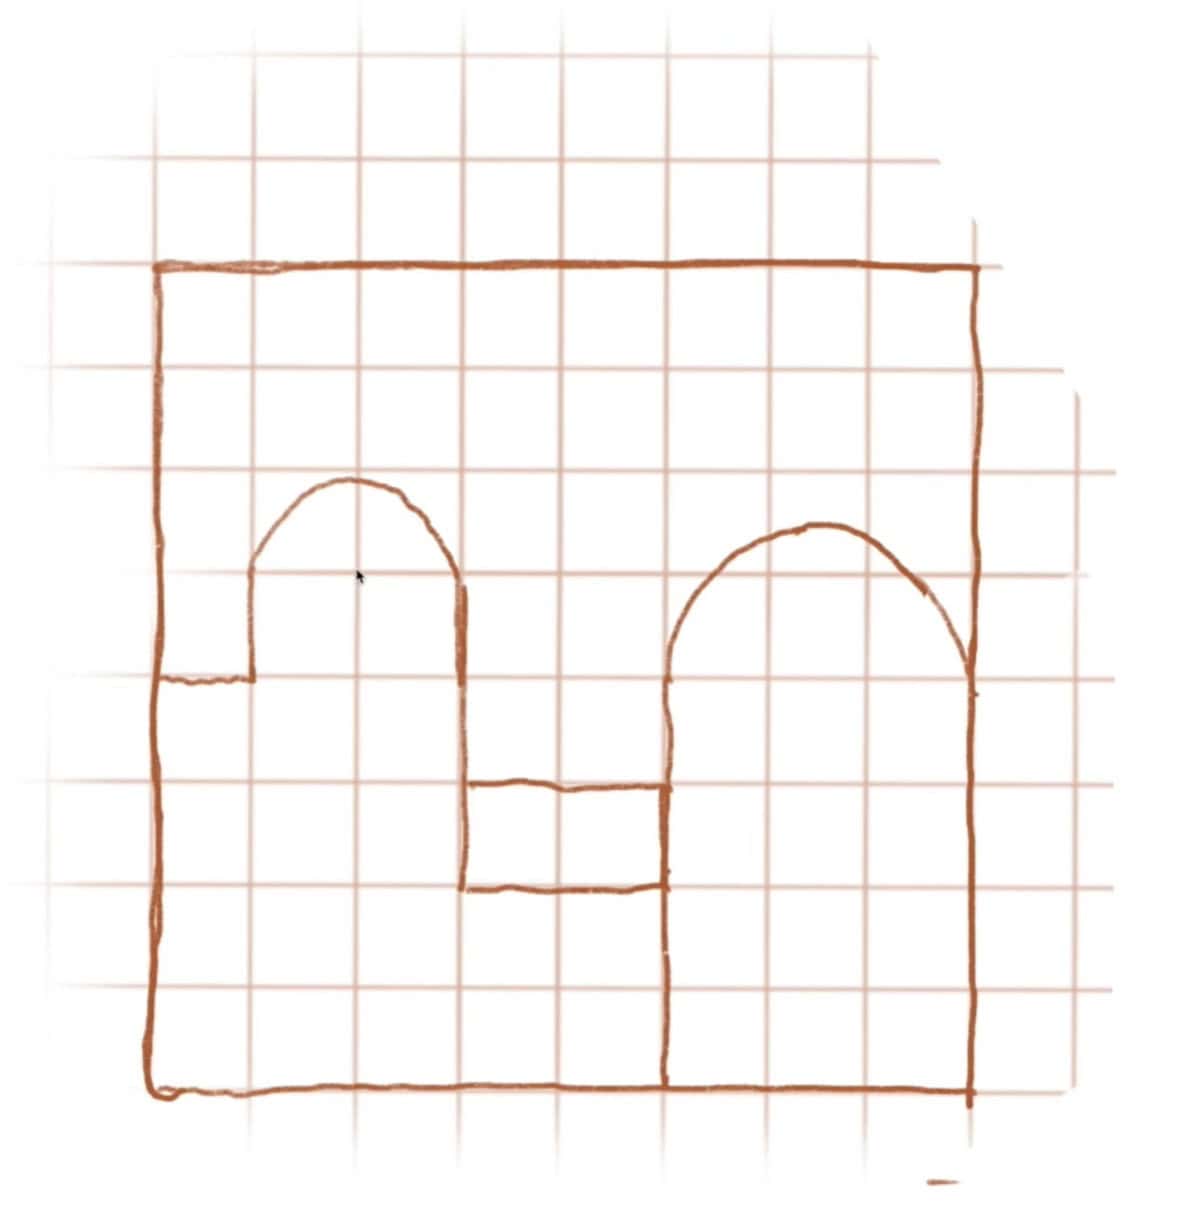 A hand-drawn, asymmetrical geometric shape resembling a face is sketched on a grid background. The shape includes two arch-like forms for eyes and a rectangle for a mouth, reminiscent of garden design basics with its structured yet freeform style. The grid consists of evenly spaced vertical and horizontal lines.